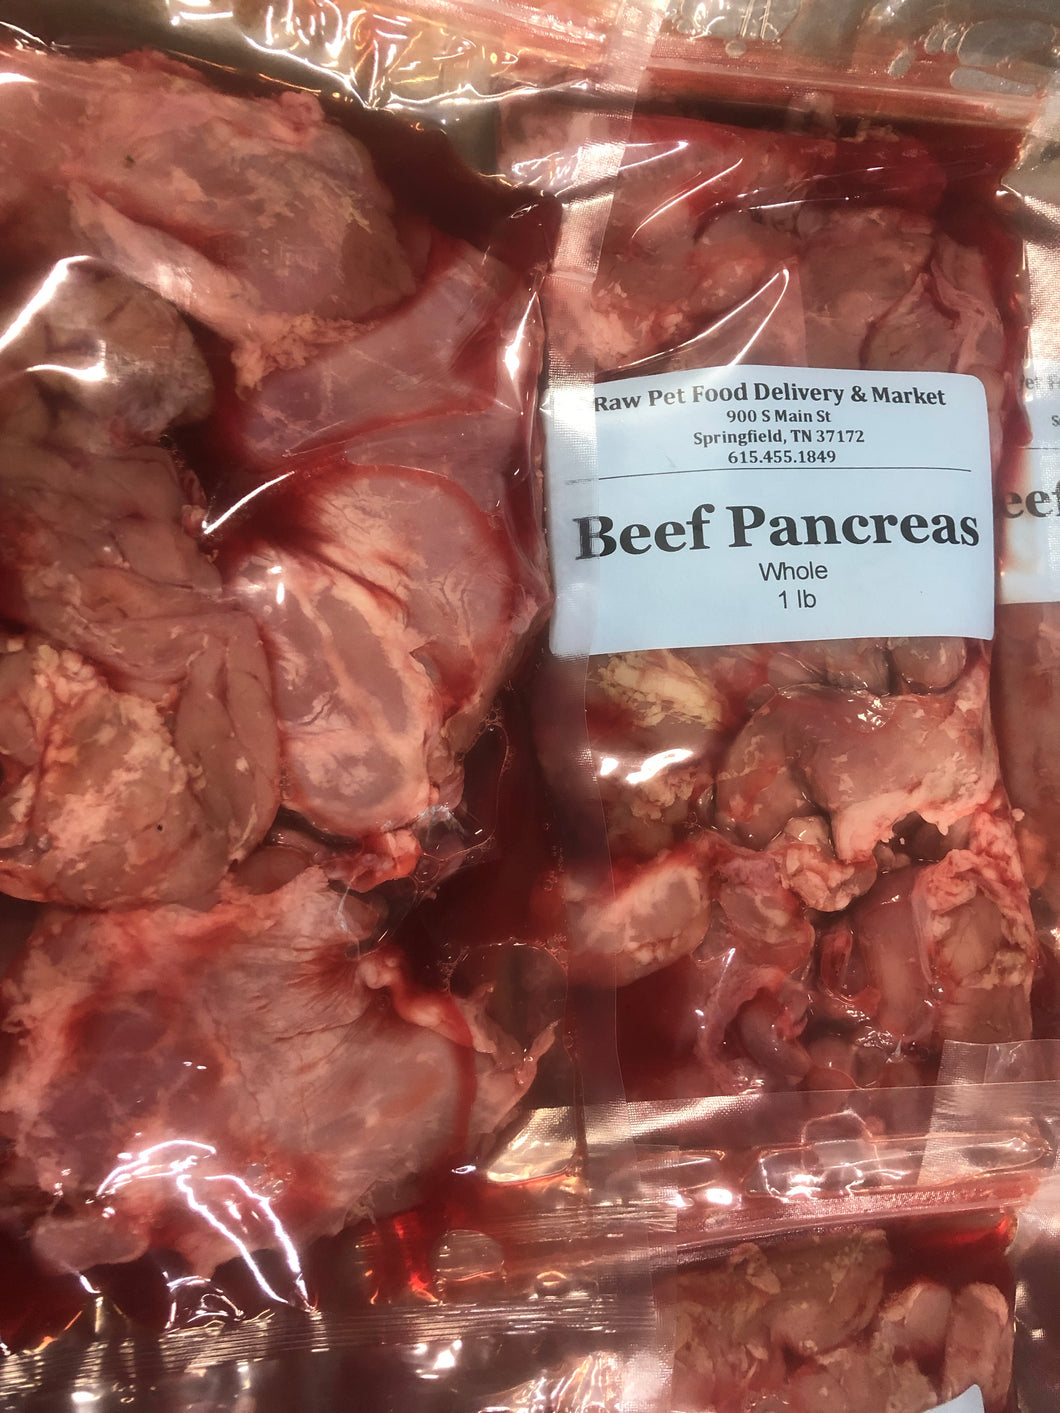 Beef Pancreas Whole or Ground